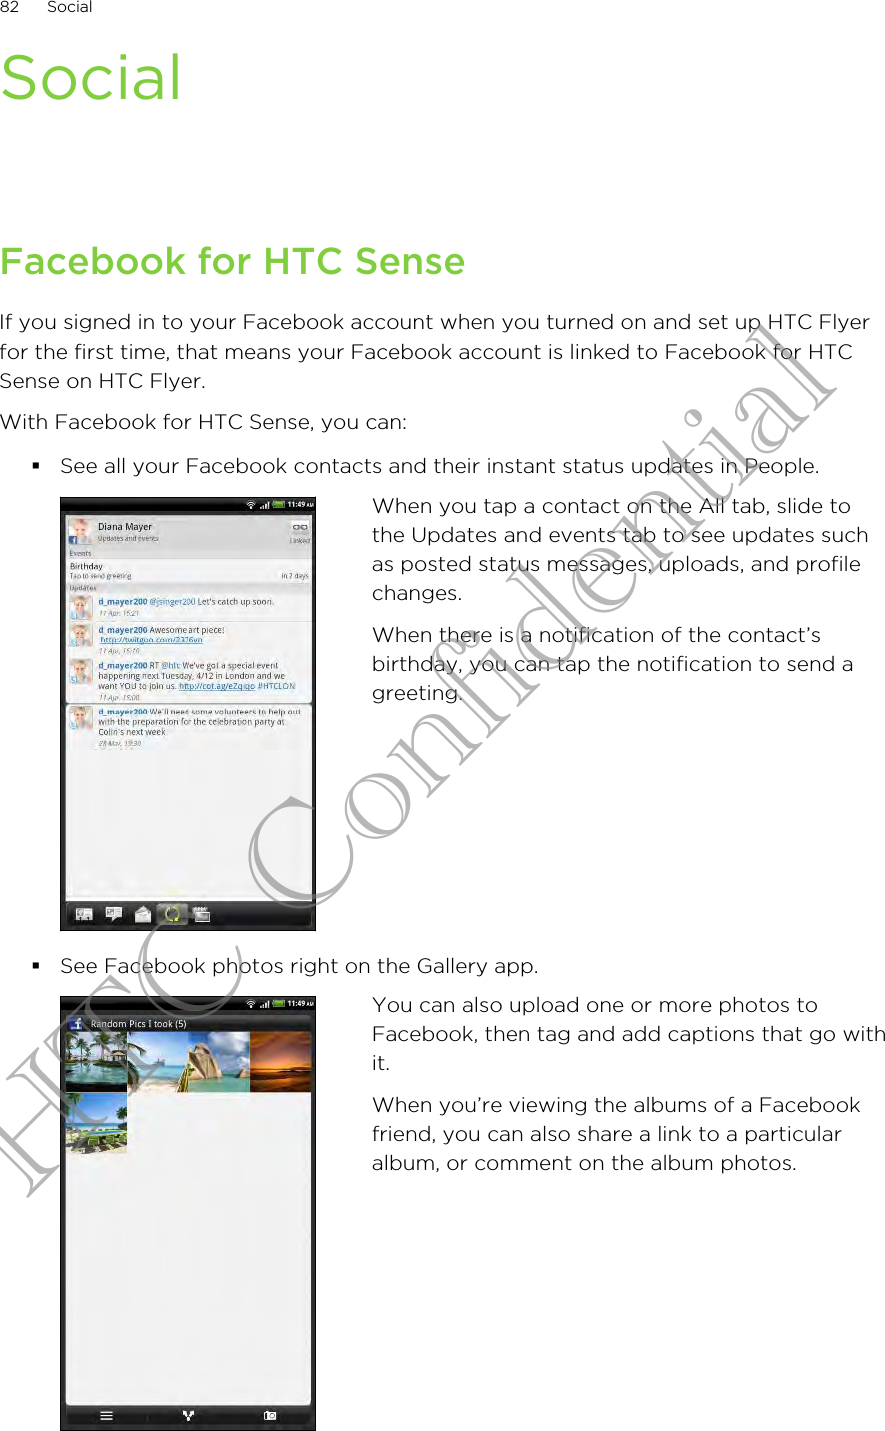 SocialFacebook for HTC SenseIf you signed in to your Facebook account when you turned on and set up HTC Flyerfor the first time, that means your Facebook account is linked to Facebook for HTCSense on HTC Flyer.With Facebook for HTC Sense, you can:§See all your Facebook contacts and their instant status updates in People.When you tap a contact on the All tab, slide tothe Updates and events tab to see updates suchas posted status messages, uploads, and profilechanges.When there is a notification of the contact’sbirthday, you can tap the notification to send agreeting.§See Facebook photos right on the Gallery app.You can also upload one or more photos toFacebook, then tag and add captions that go withit.When you’re viewing the albums of a Facebookfriend, you can also share a link to a particularalbum, or comment on the album photos.82 SocialHTC Confidential